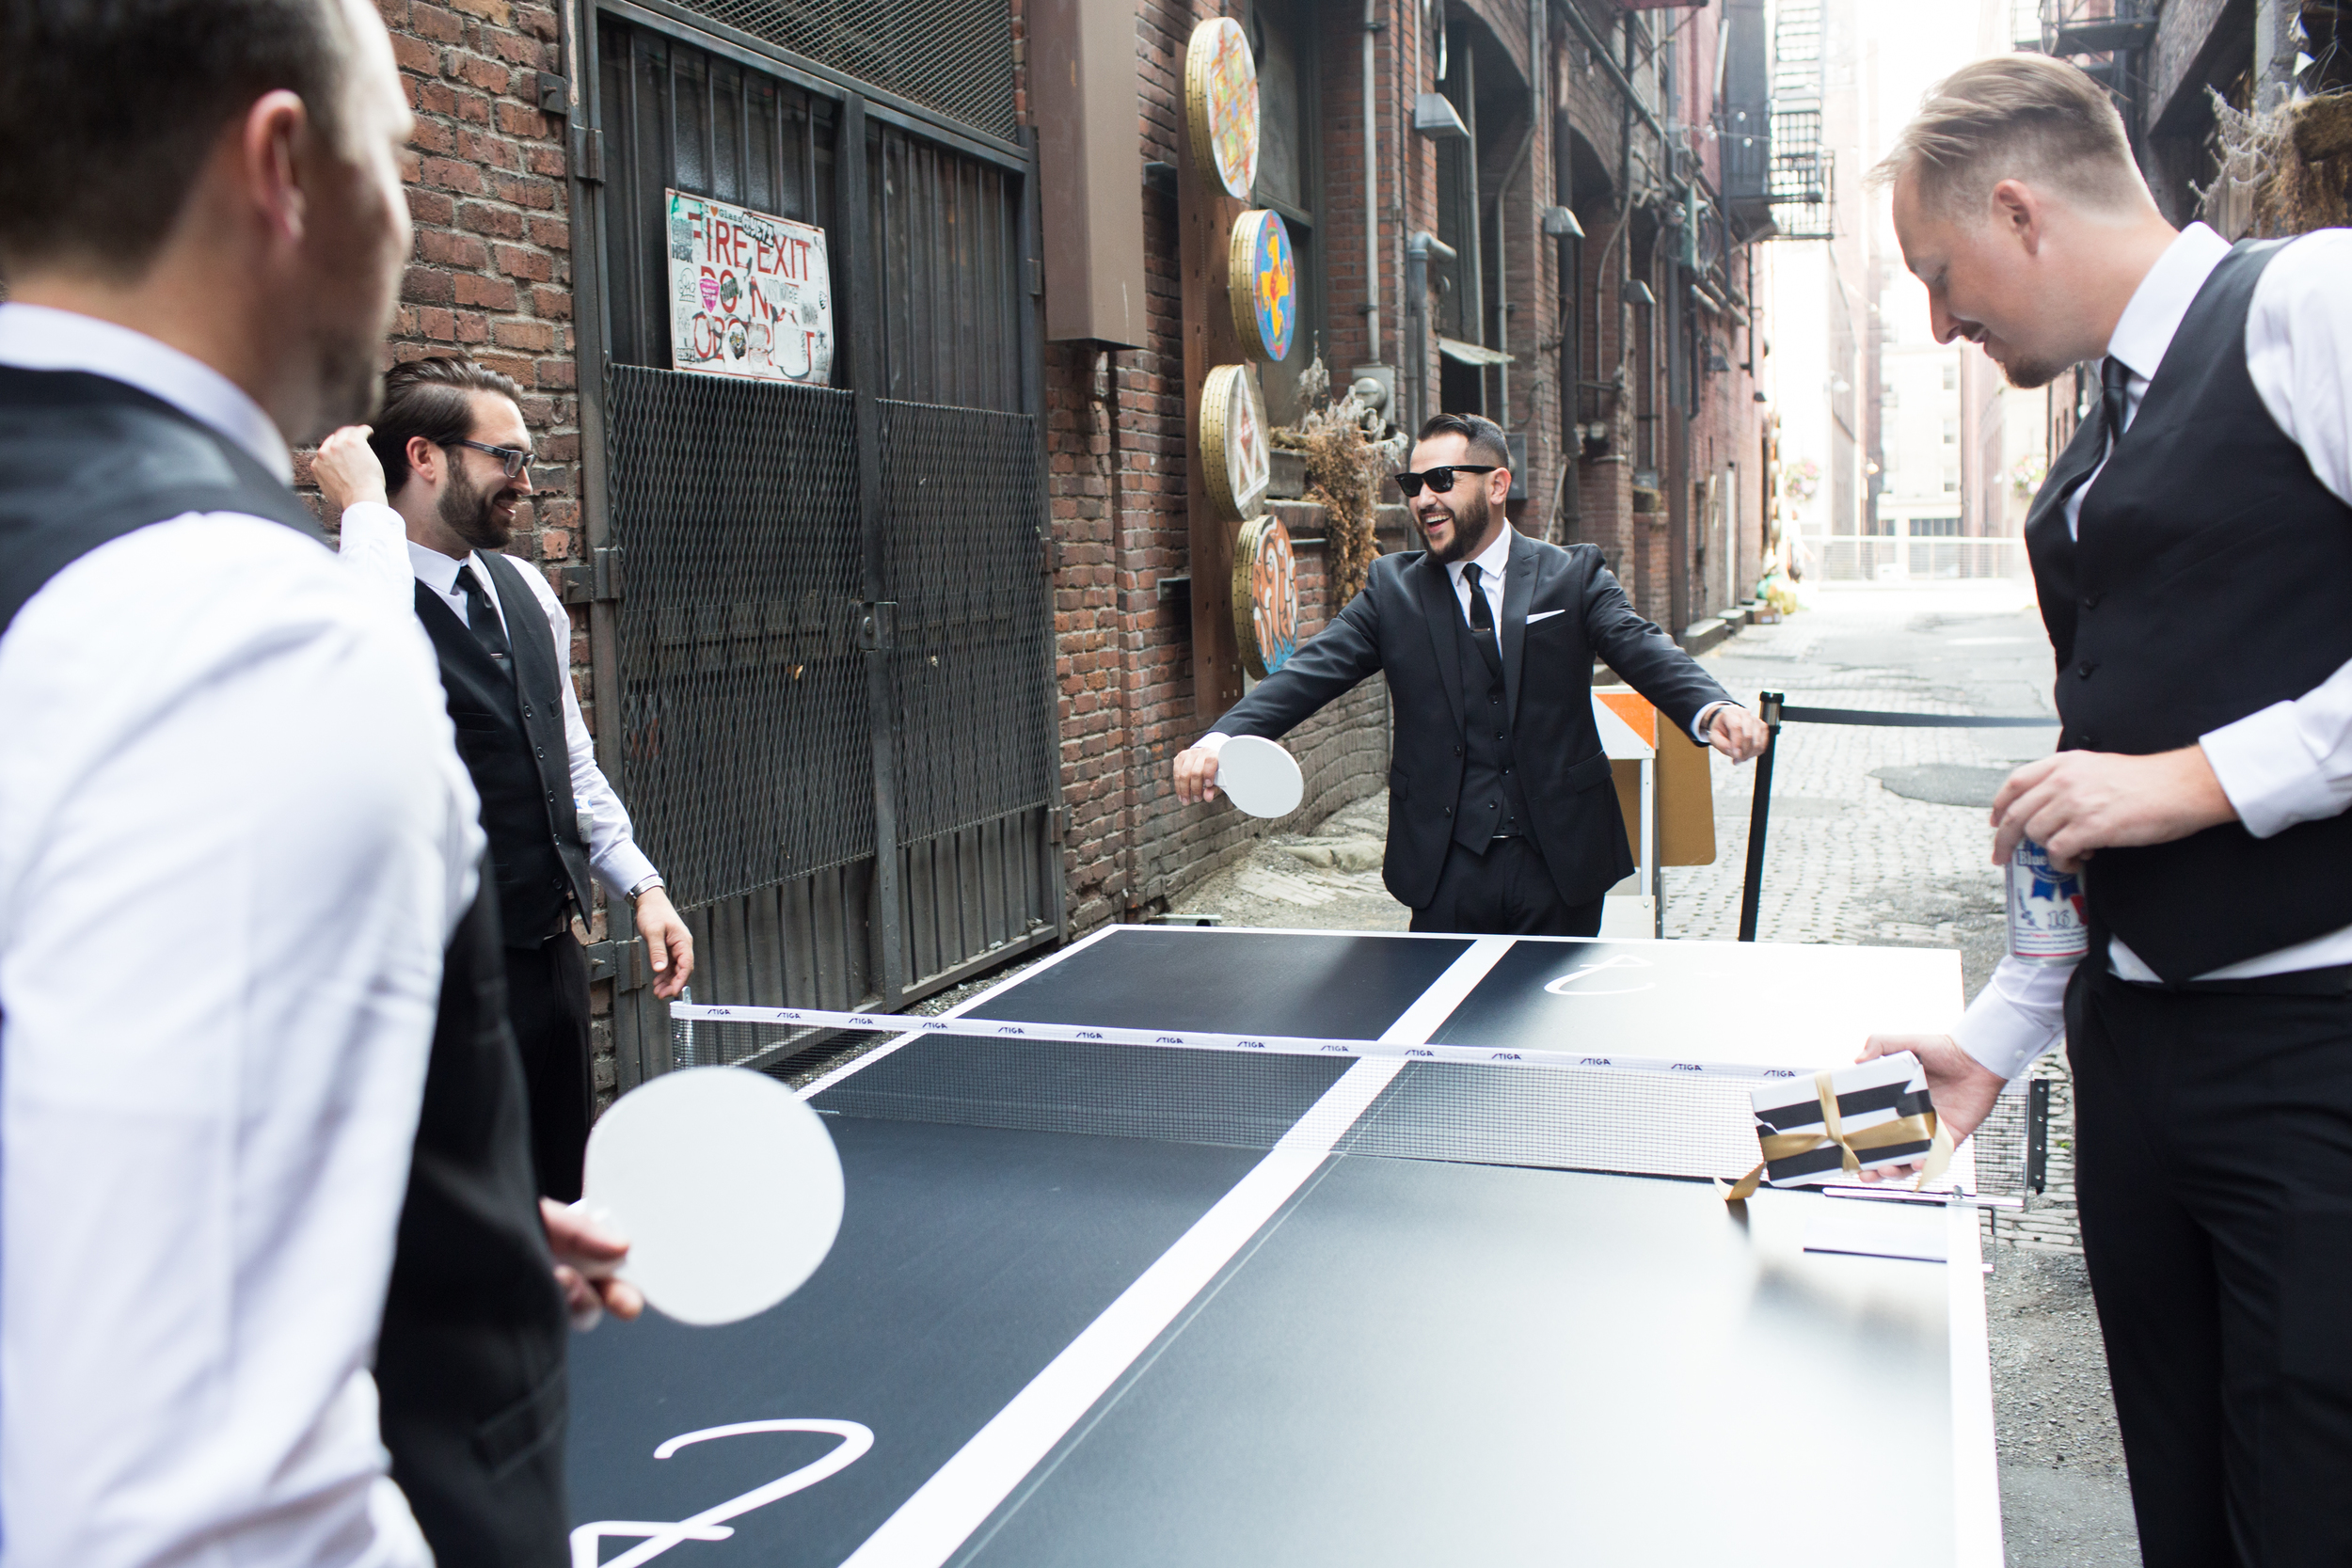 Wedding Ping Pong Table | Axis Pioneer Square Wedding | Angela and Evan Photography | Seattle Wedding Planner